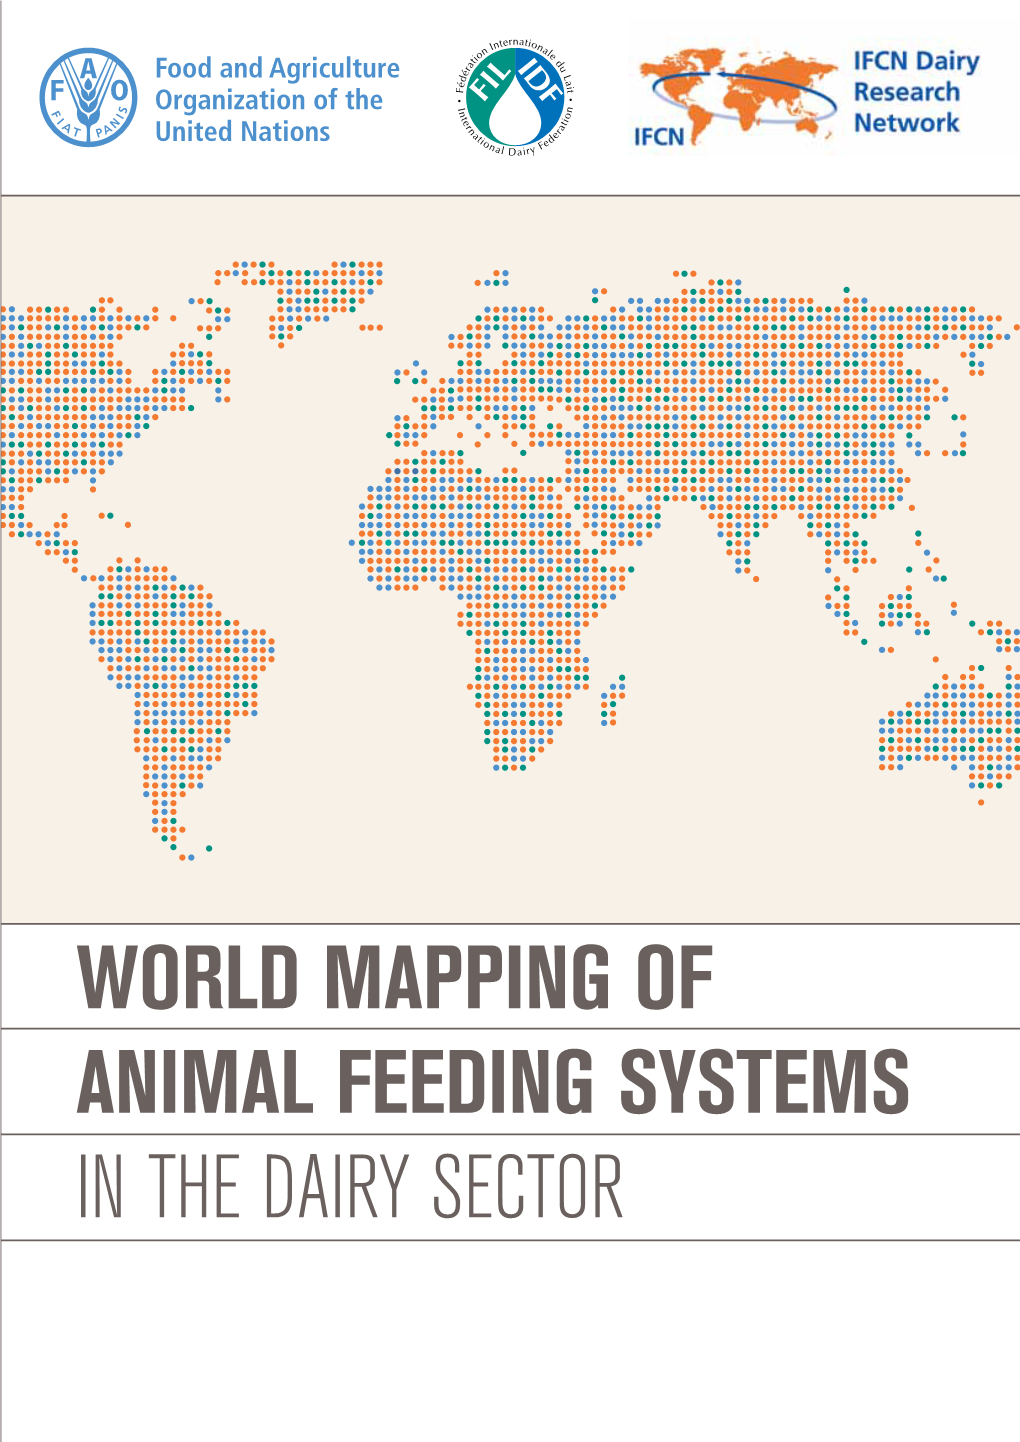 WORLD MAPPING of ANIMAL FEEDING SYSTEMS in the DAIRY SECTOR FAO Idf Ifcn (FAO) Ations N United